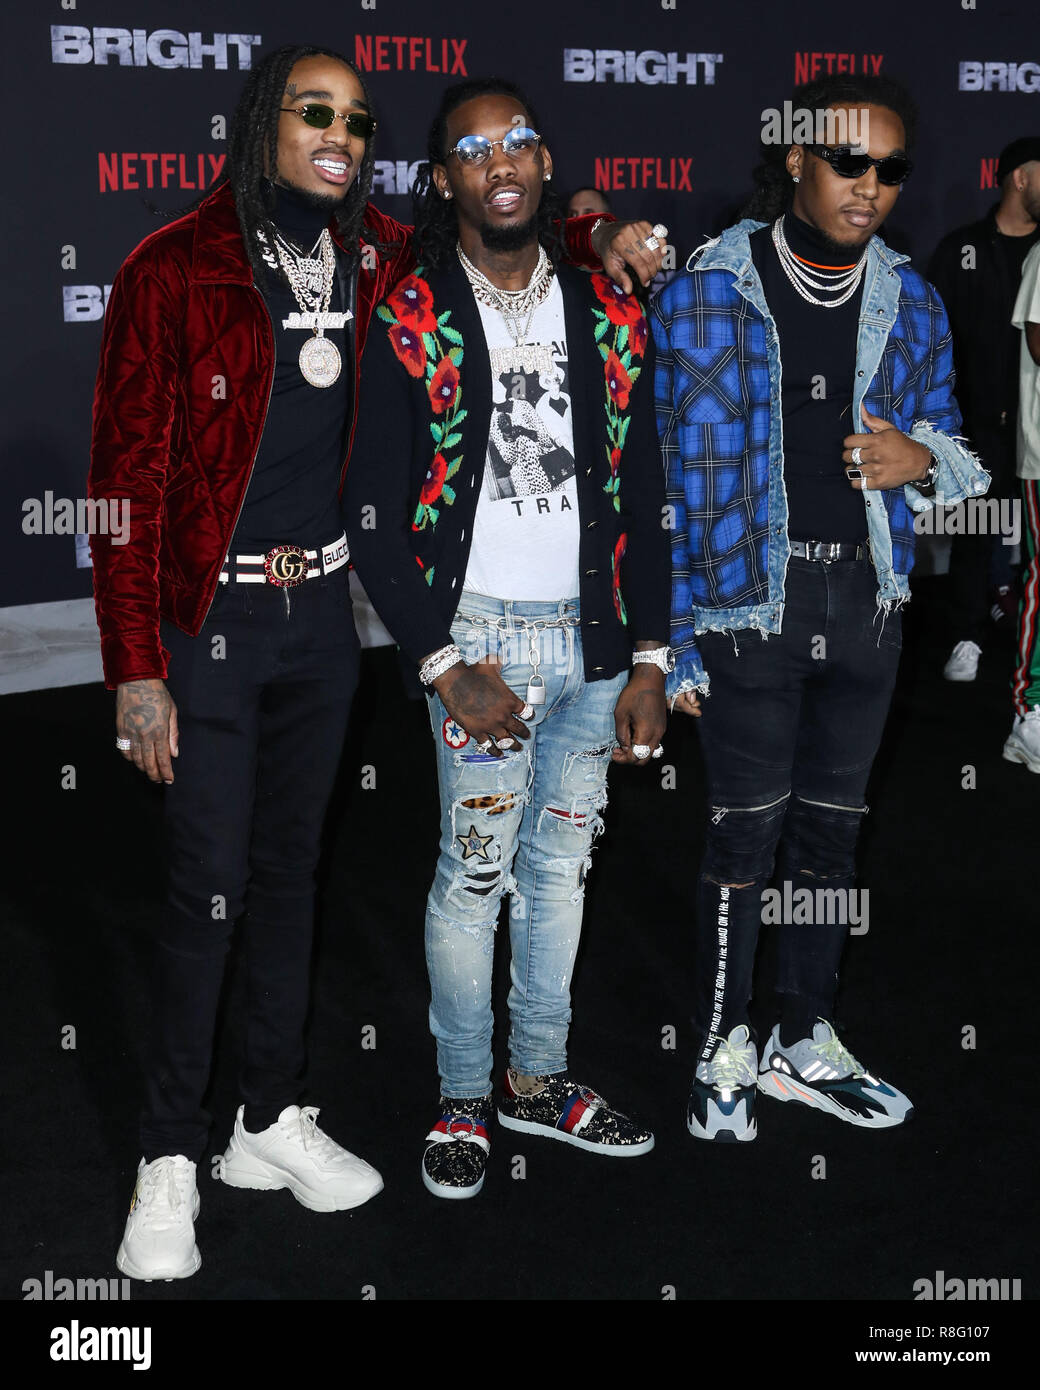 WESTWOOD, LOS ANGELES, CA, USA - DECEMBER 13: Takeoff, Offset, Quavo, Migos  at the Los Angeles Premiere Of Netflix's 'Bright' held at the Regency  Village Theatre on December 13, 2017 in Westwood